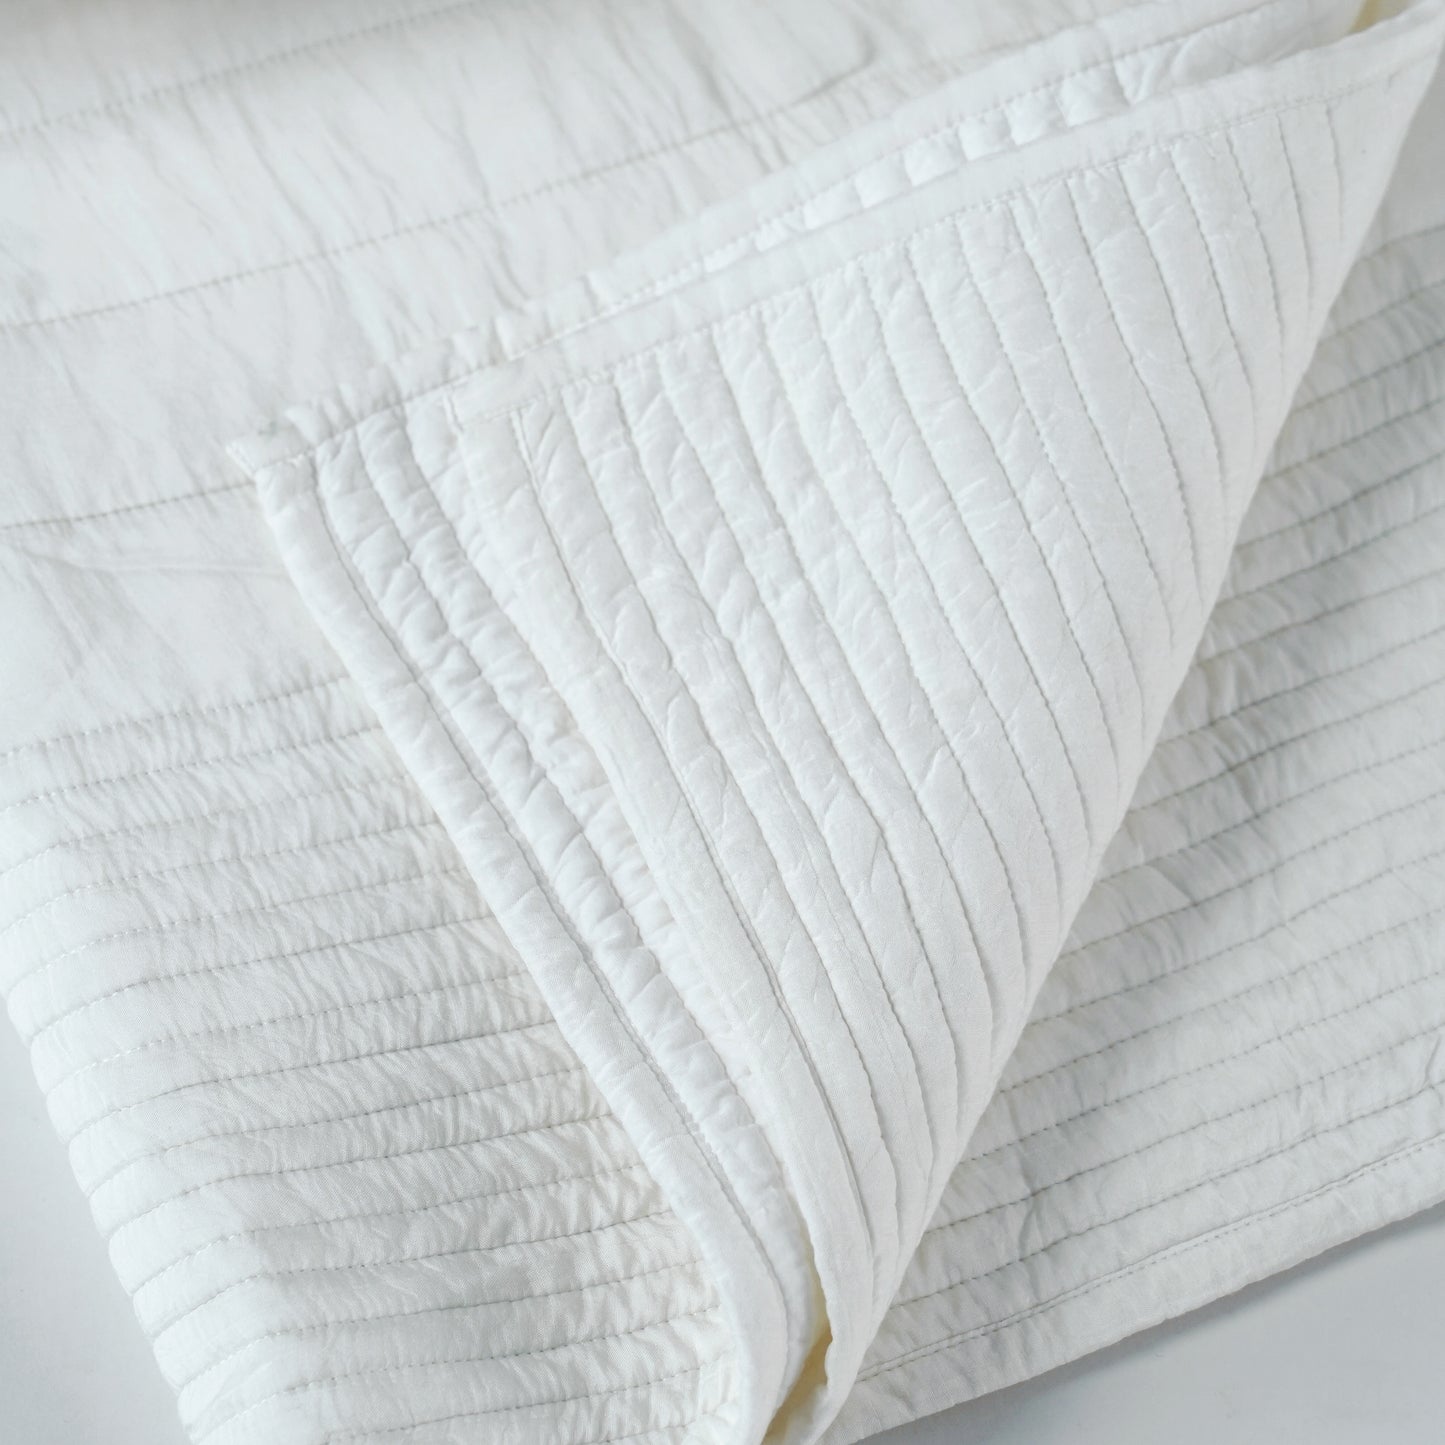 SHWET - White luxury 300TC cotton satin Quilt with coordinated pillow cases, Sizes available